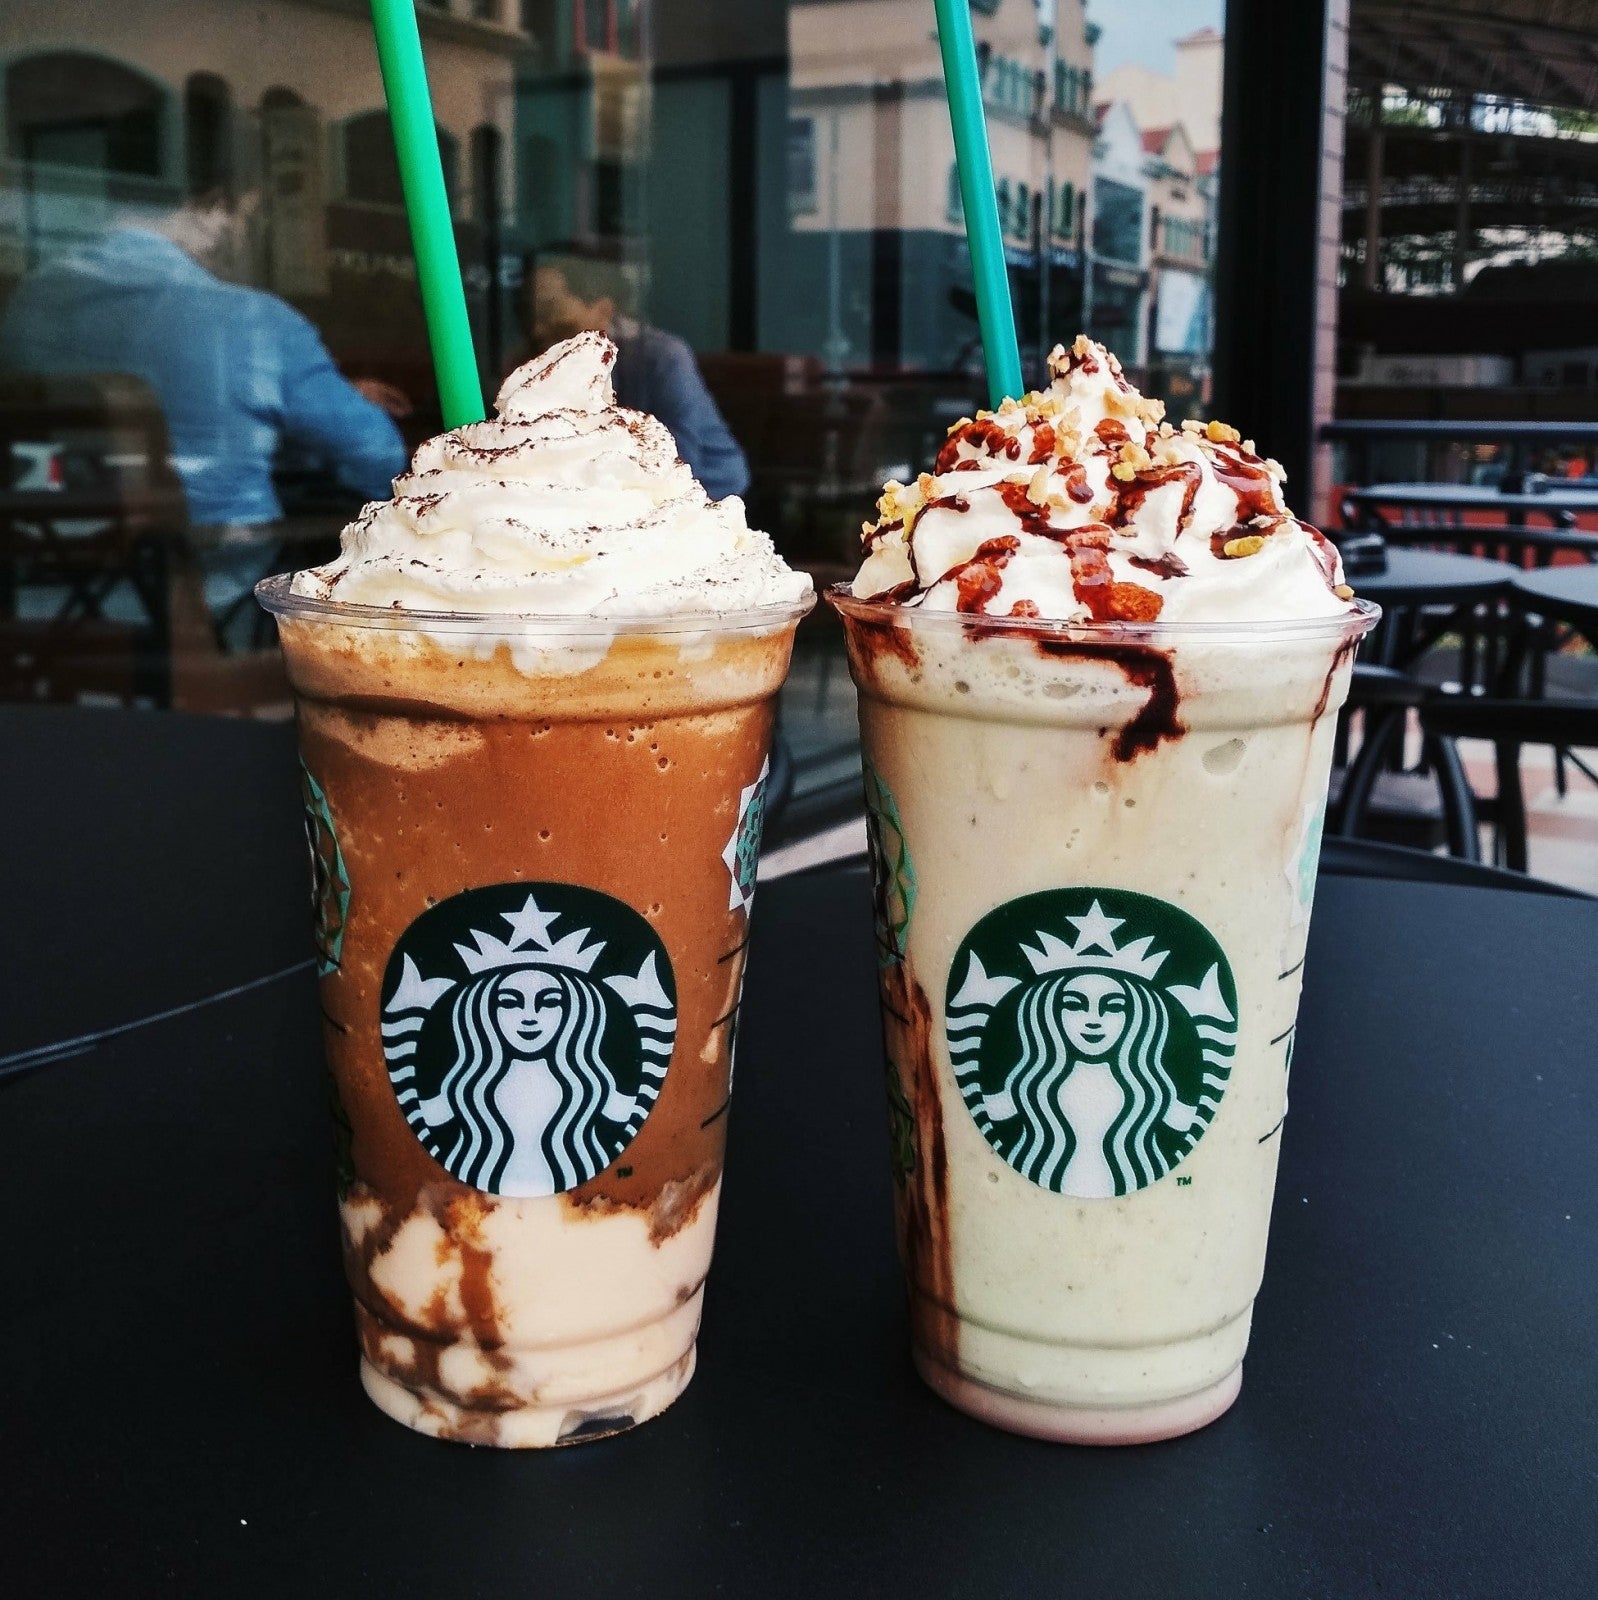 You Can Now Enjoy Buy 1 Free 1 Starbucks Handcrafted Beverages Until 30 Sept! - WORLD OF BUZZ